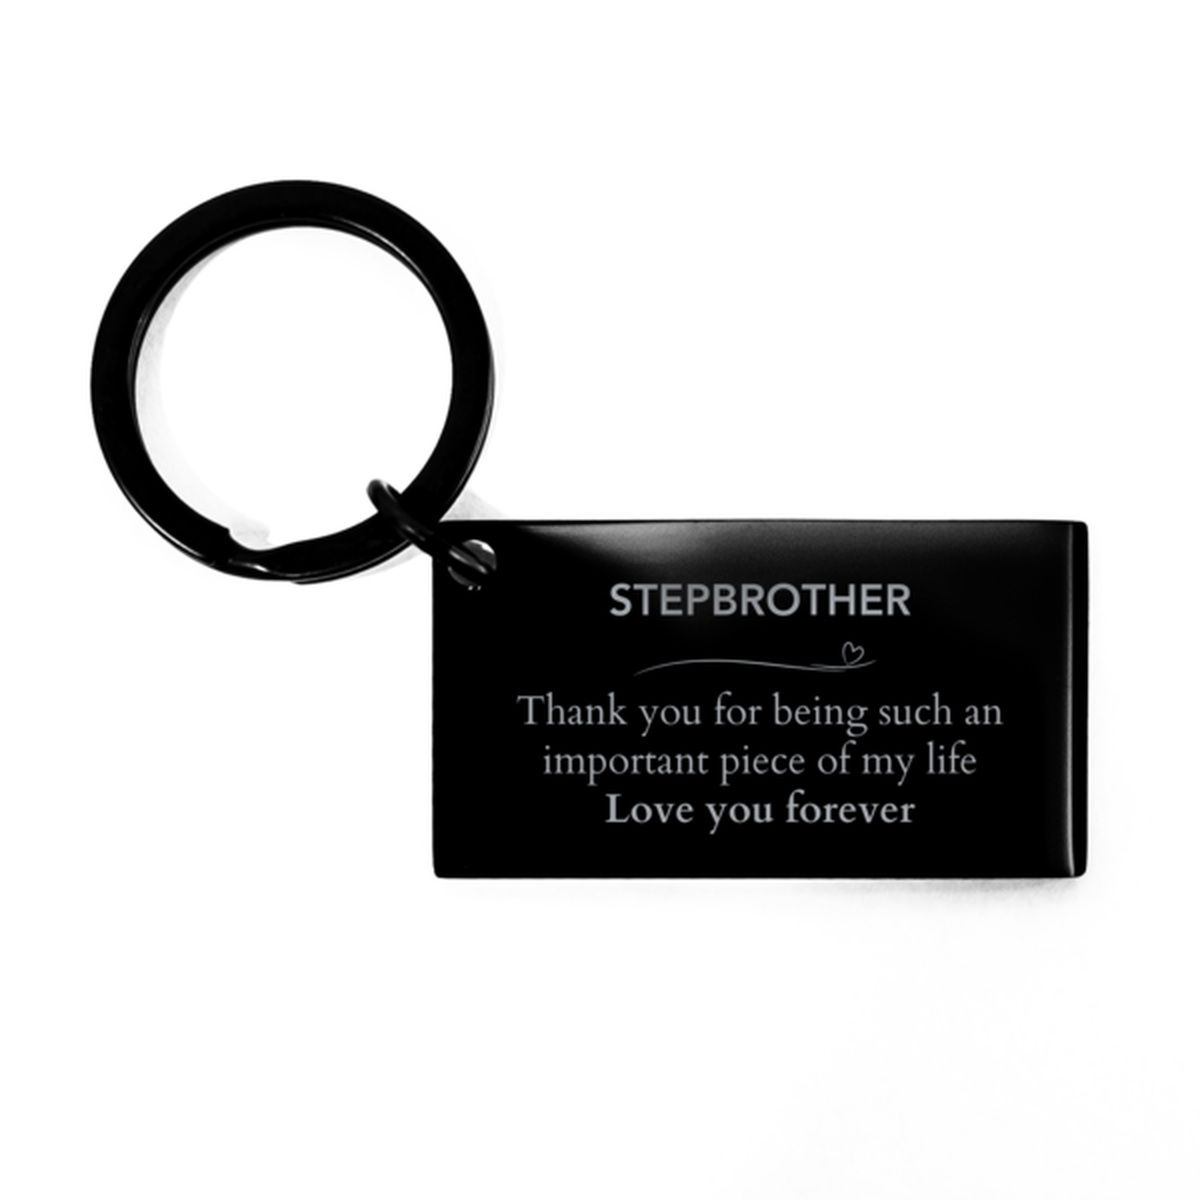 Appropriate Stepbrother Keychain Epic Birthday Gifts for Stepbrother Thank you for being such an important piece of my life Stepbrother Christmas Mothers Fathers Day